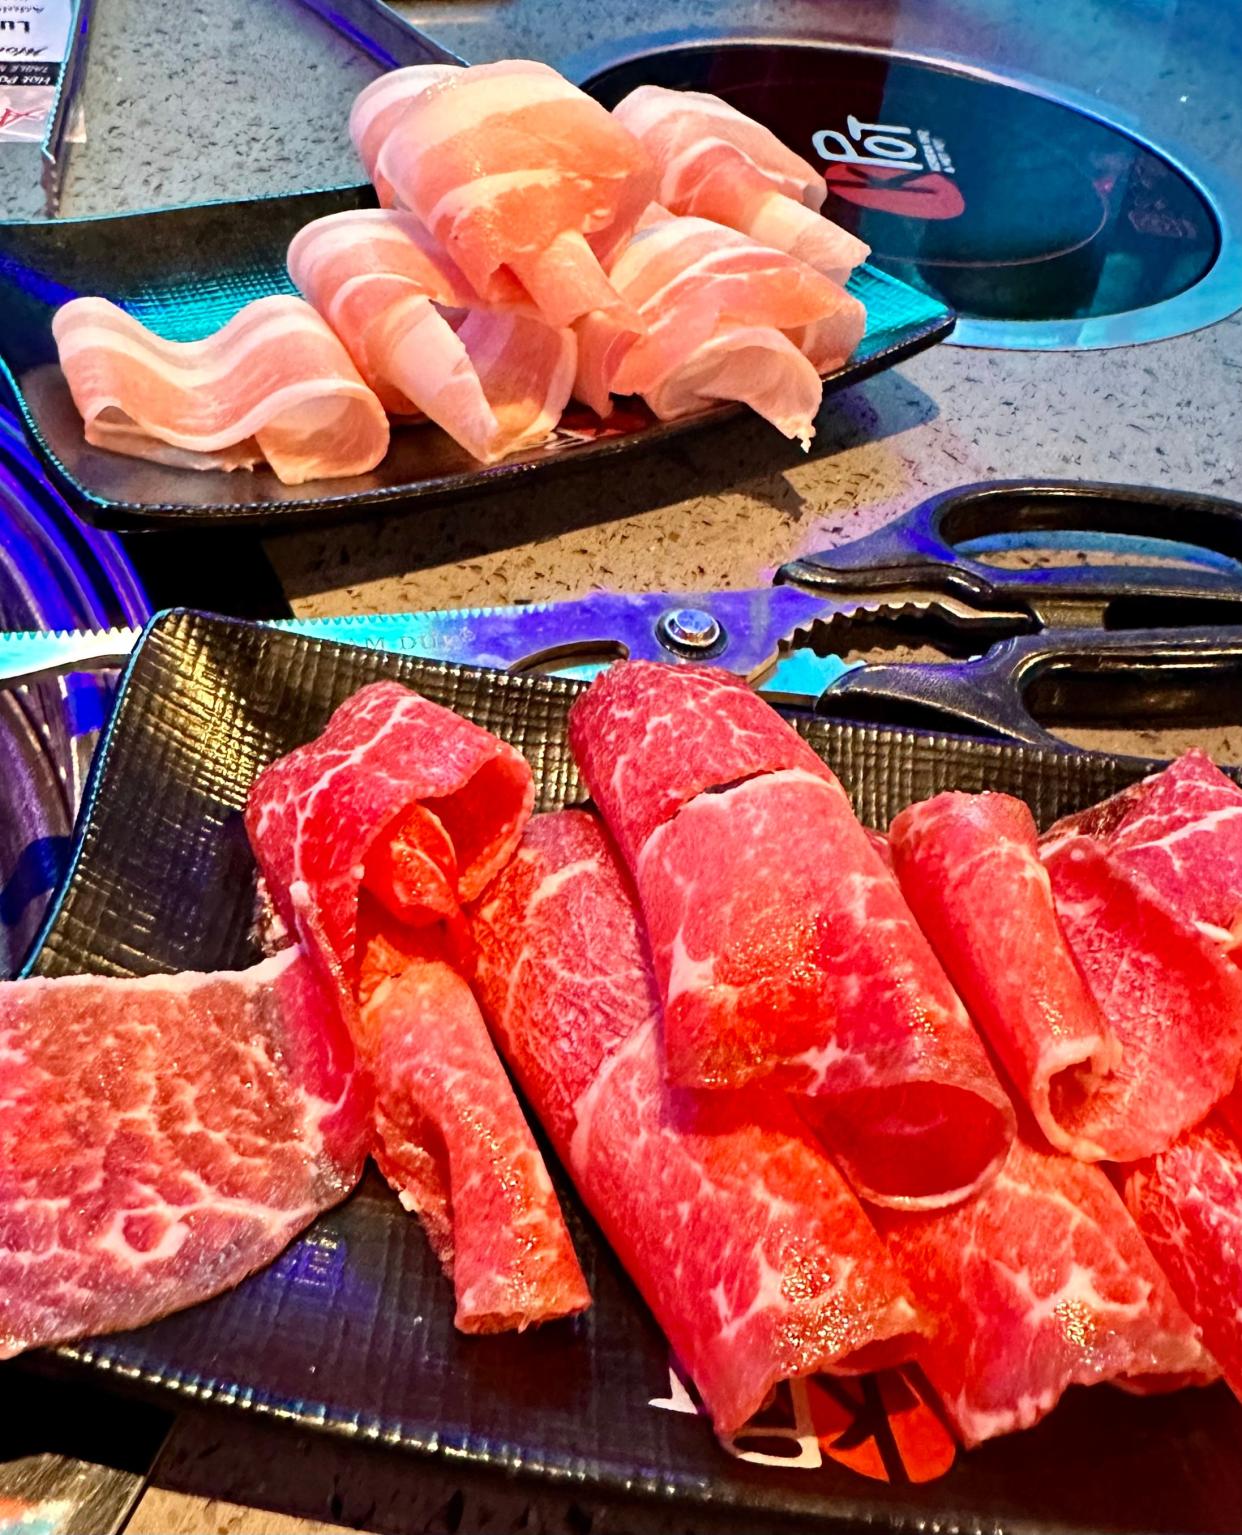 A selection of thinly sliced meats ready to be grilled at KPOT Korean BBQ & Hot Pot in Jackson Township.